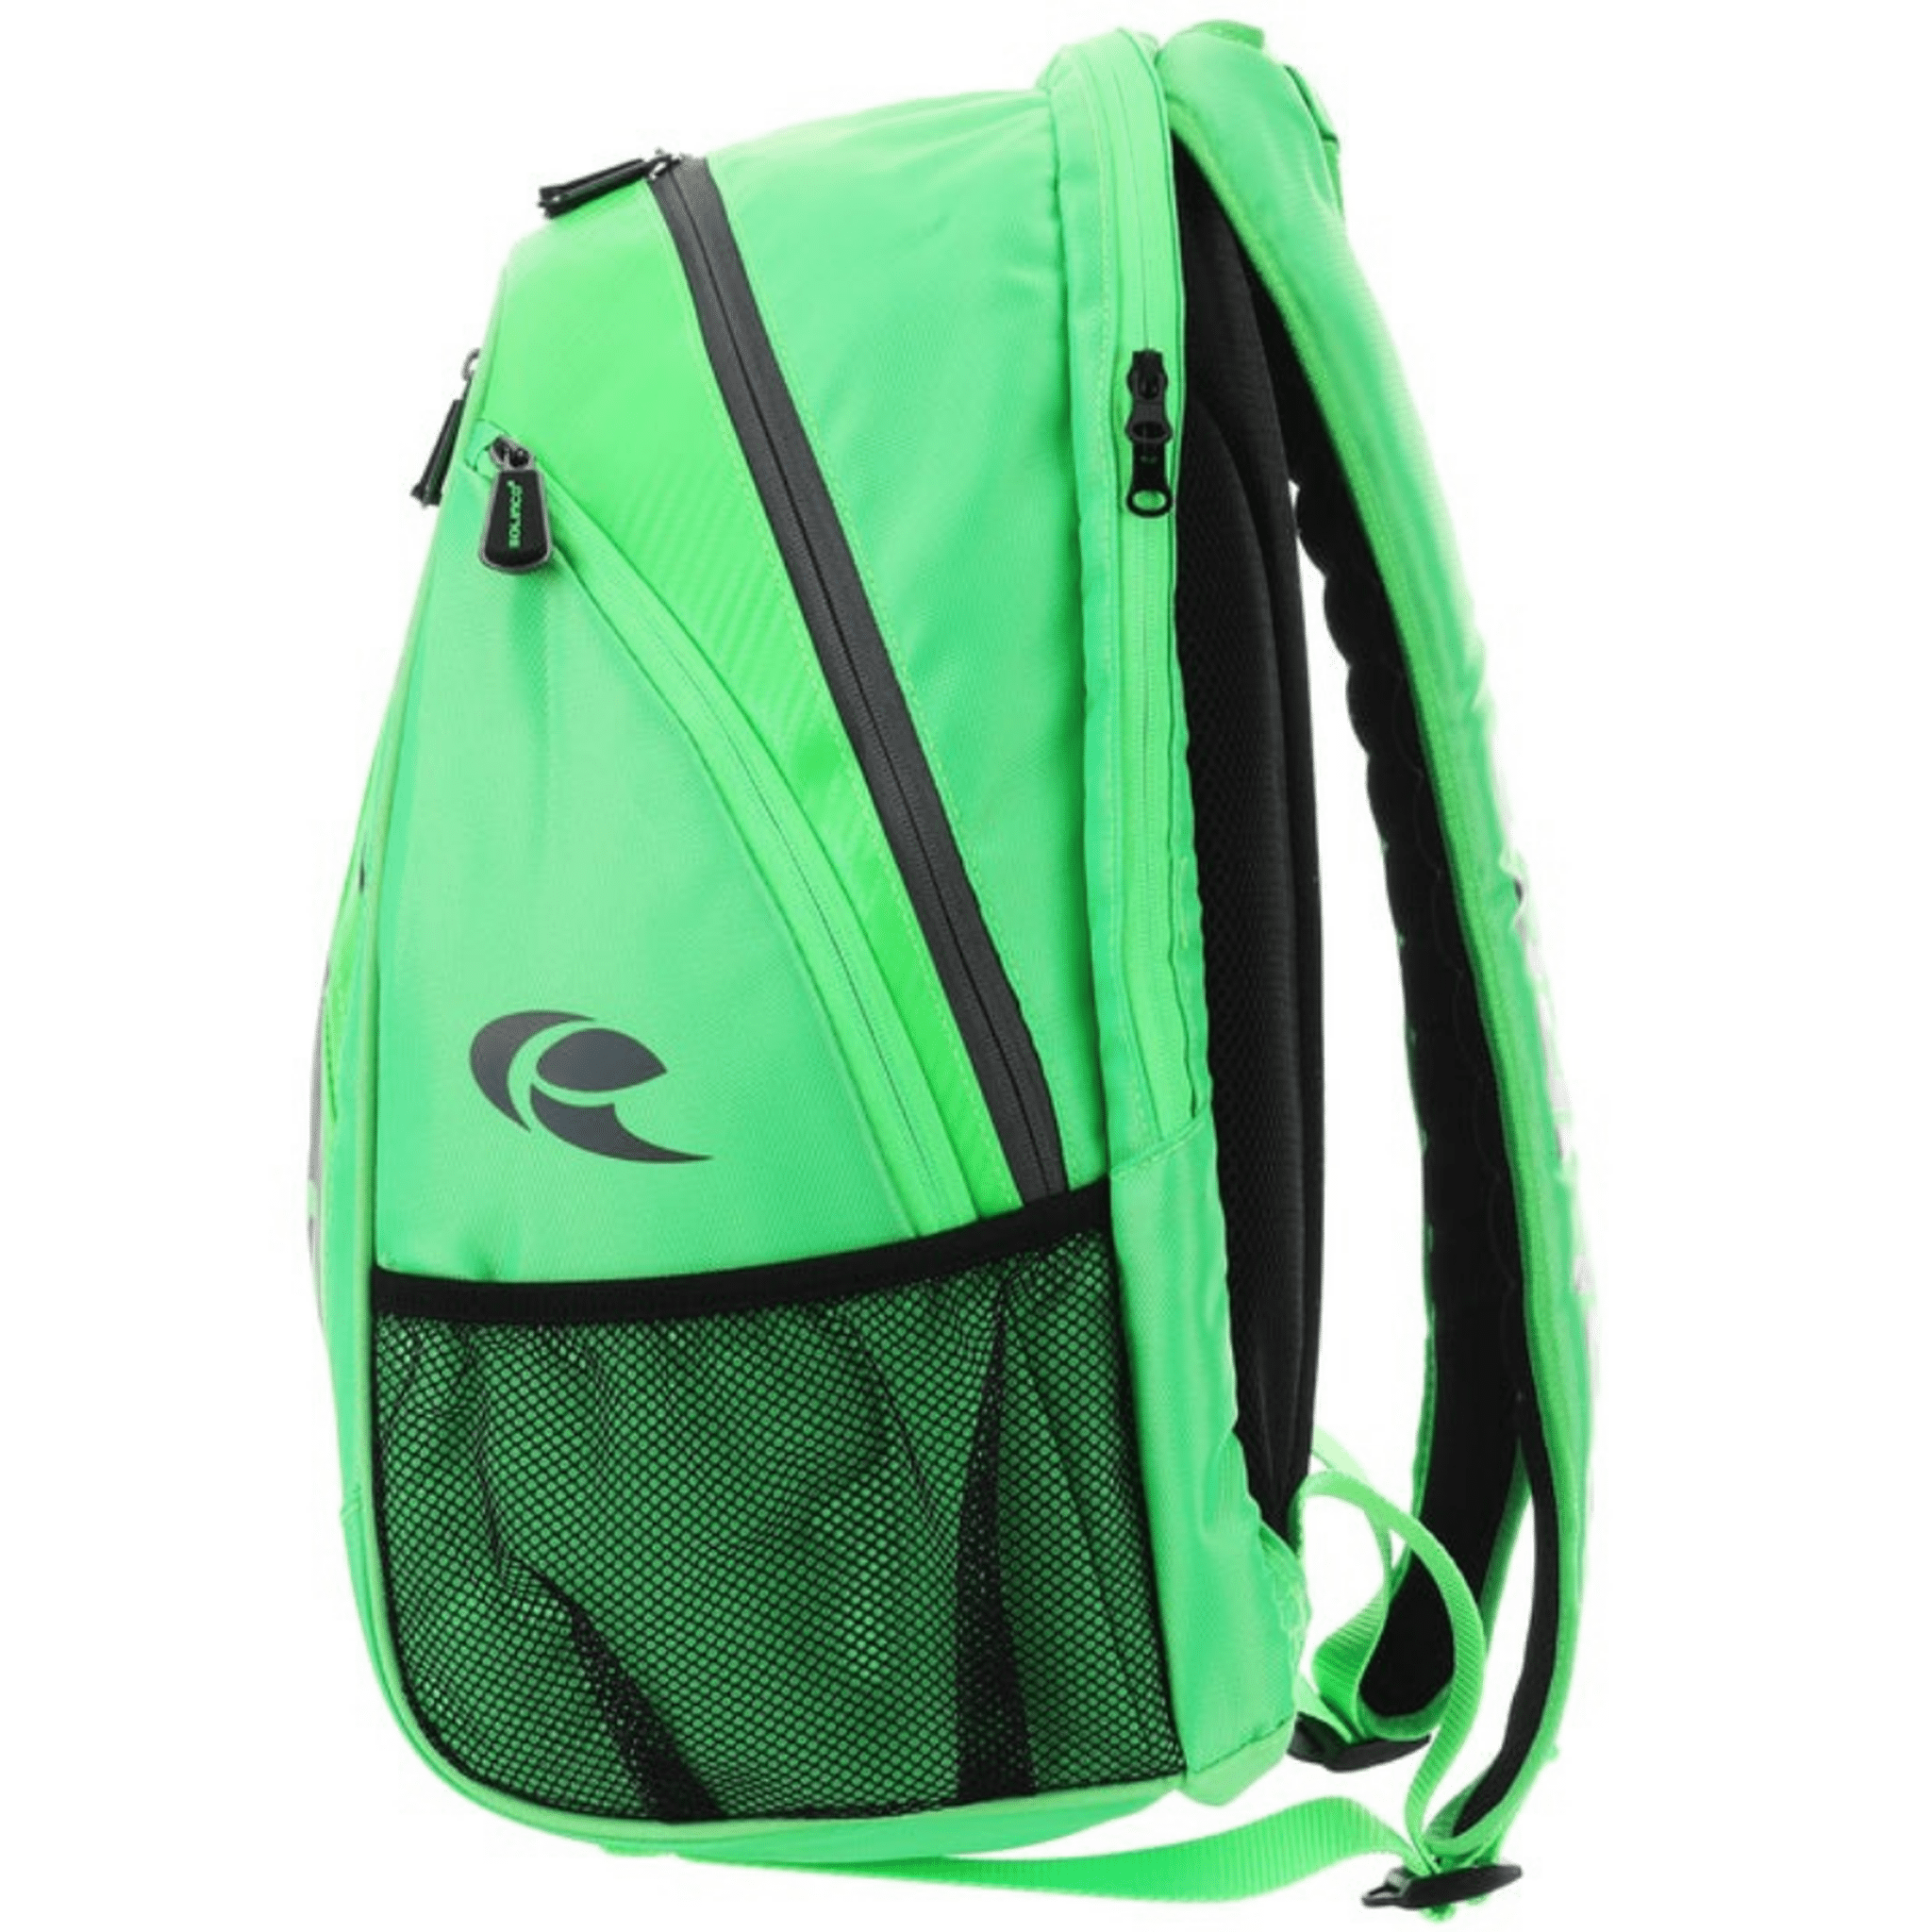 Solinco Tour Backpack - Neon Green